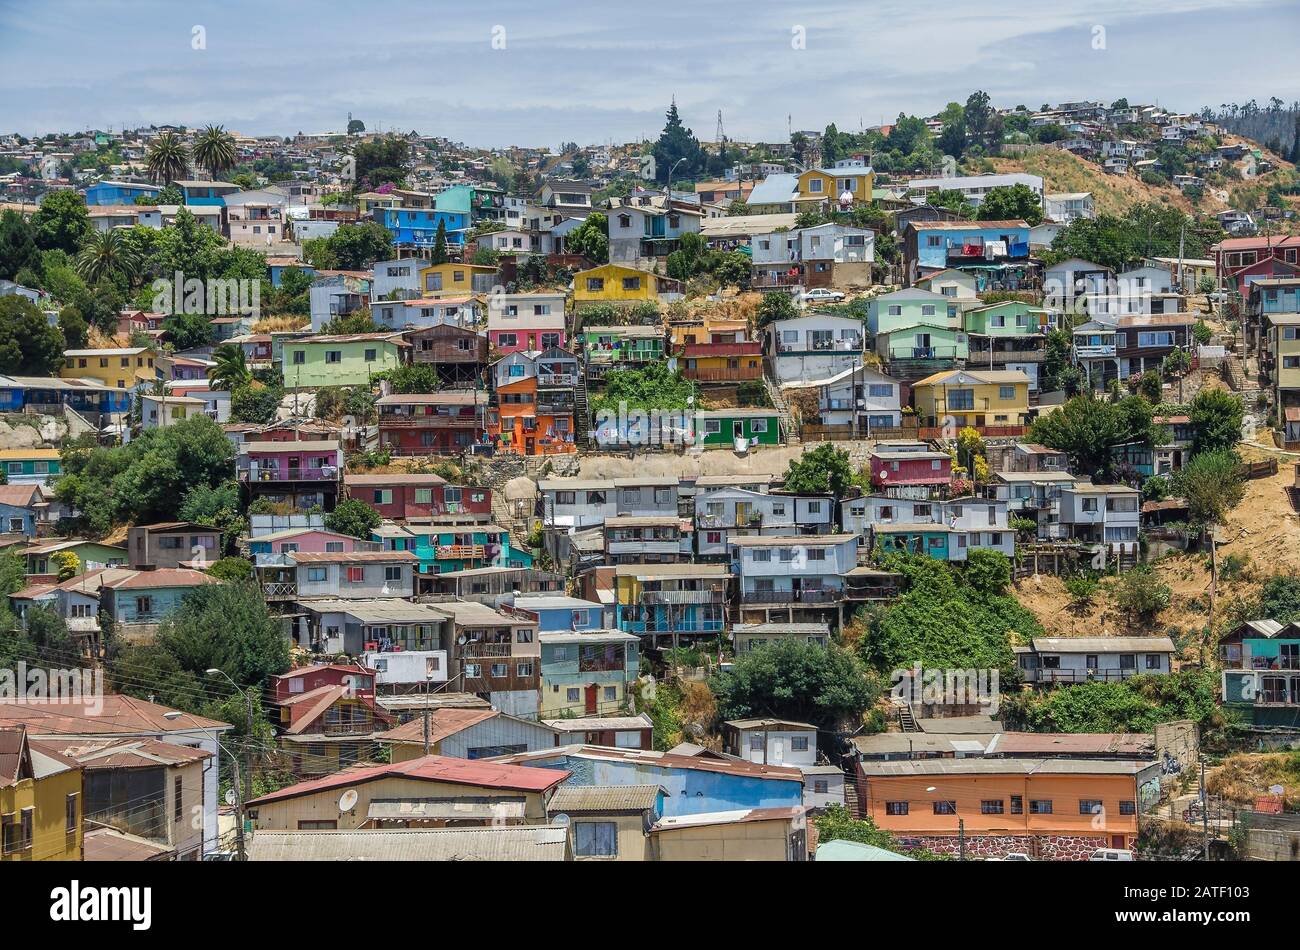 Colorful buildings of the UNESCO World Heritage city of Valparaiso, Chile Stock Photo